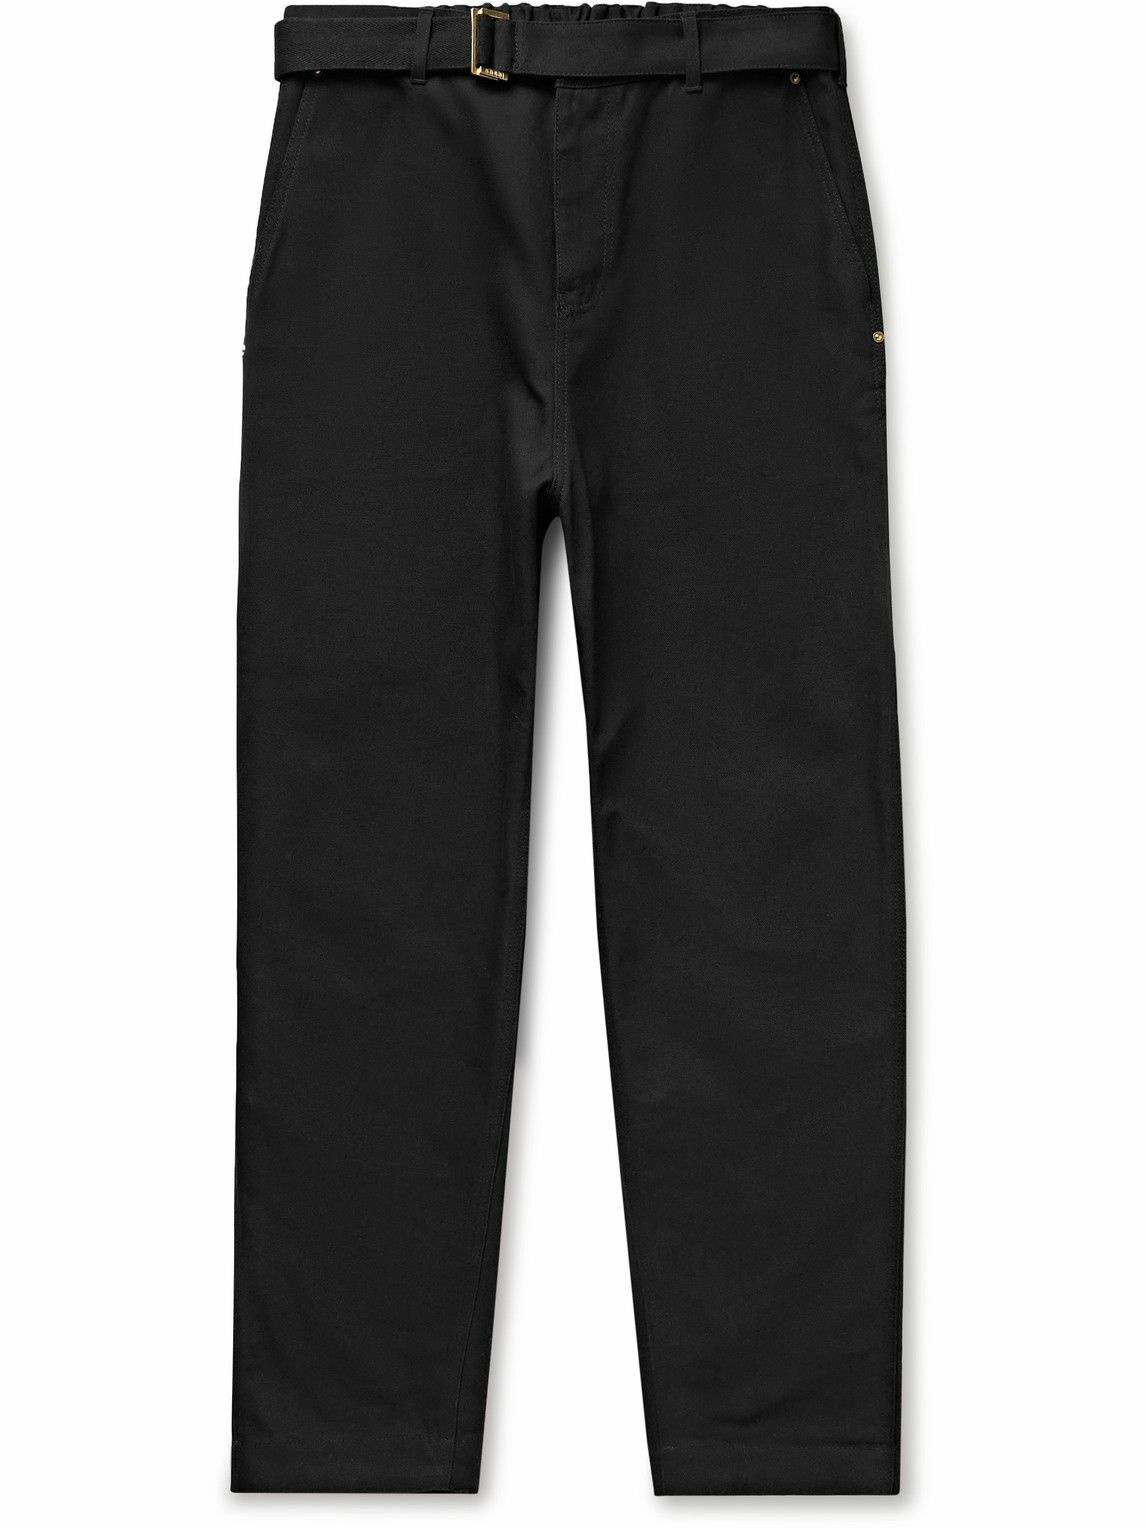 Sacai - Carhartt WIP Slim-Fit Belted Cotton-Canvas Trousers - Black Sacai